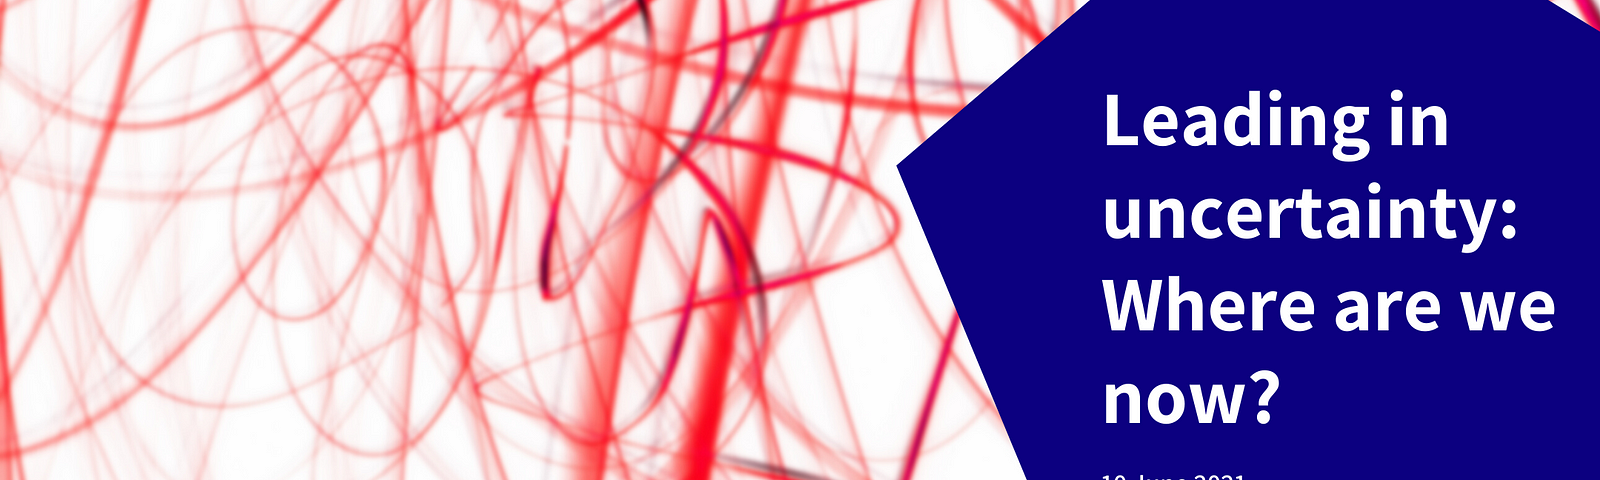 A blue hexagon with the event title, event date, network hashtag and Twitter account in white text over a background of tangled red lines